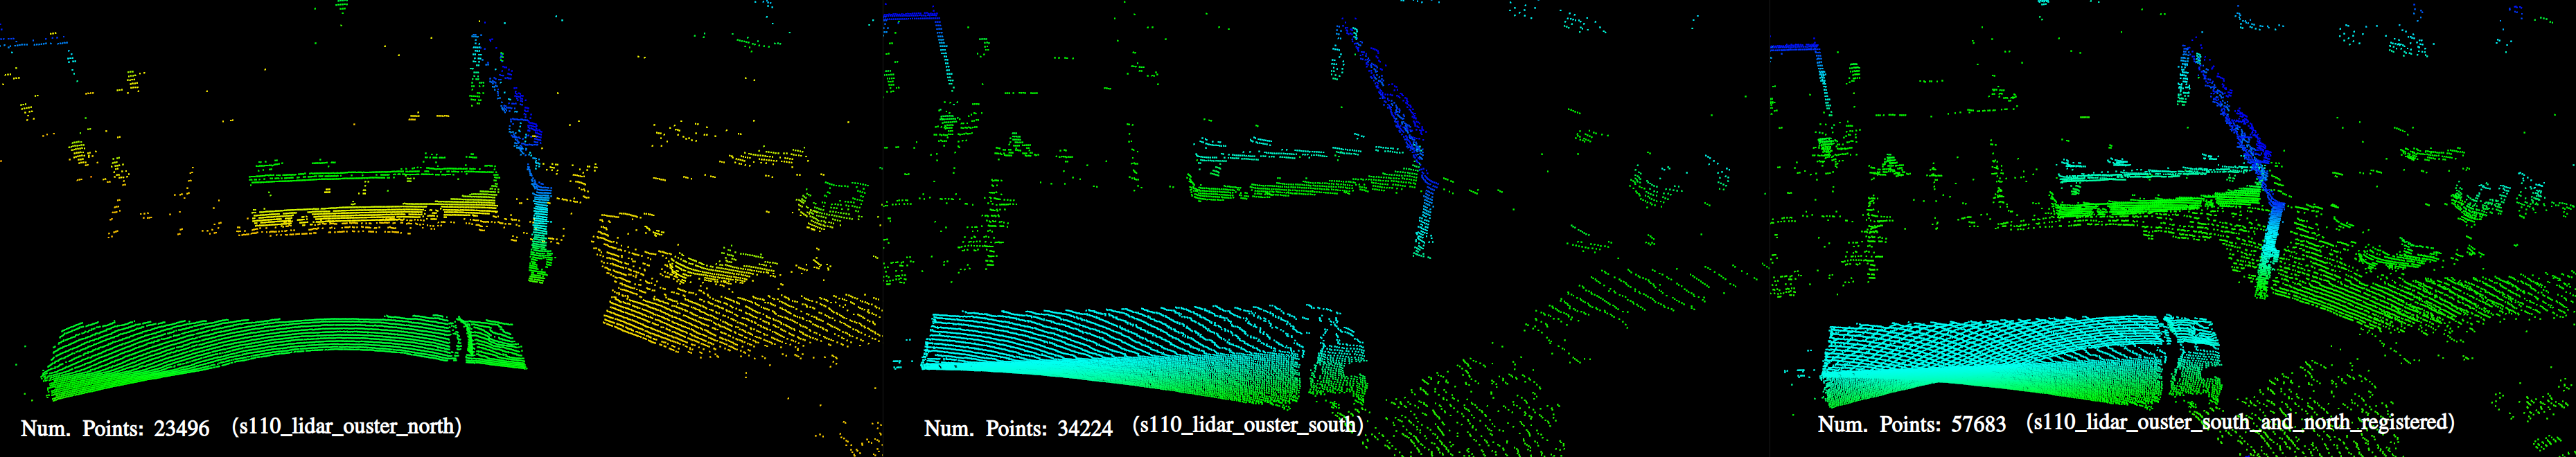 registered_point_cloud